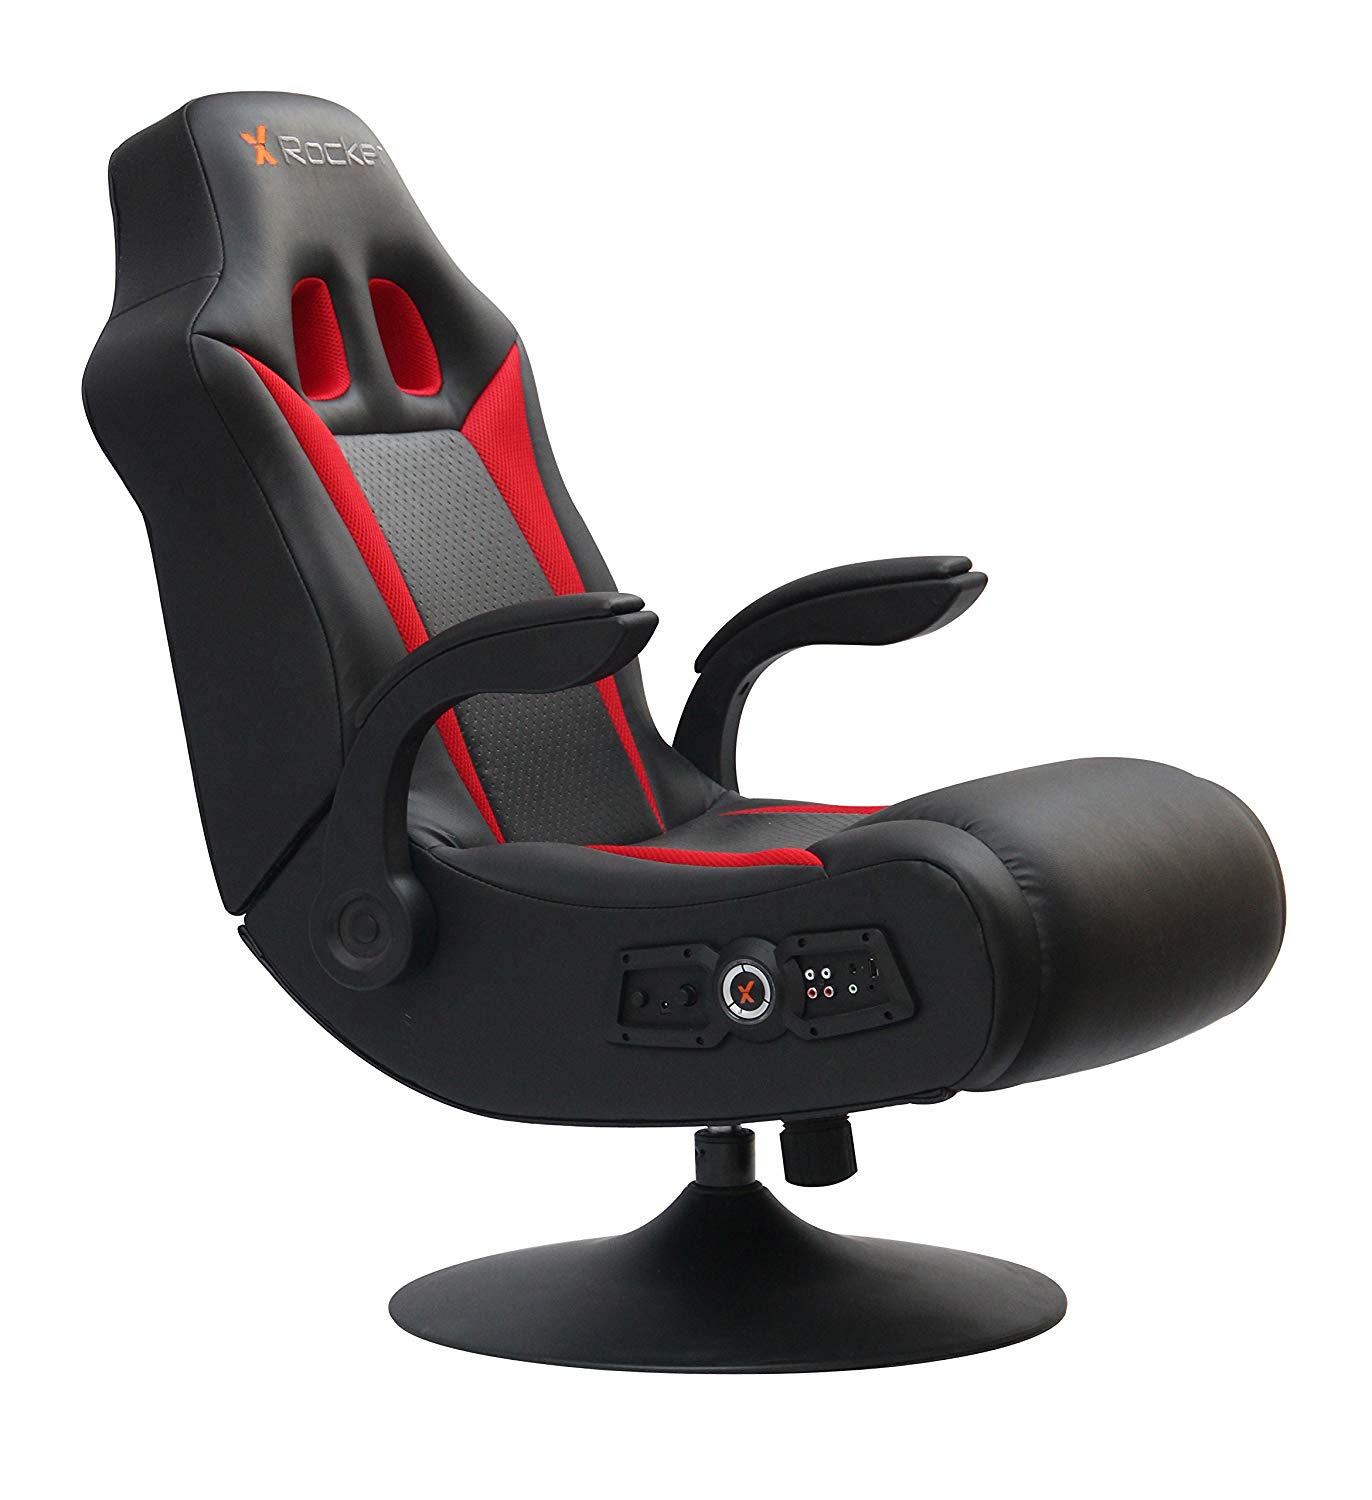 The best rocker gaming chair for adults into console gaming is the X-Rocker Vibe 2.1 with Bluetooth capabilities.